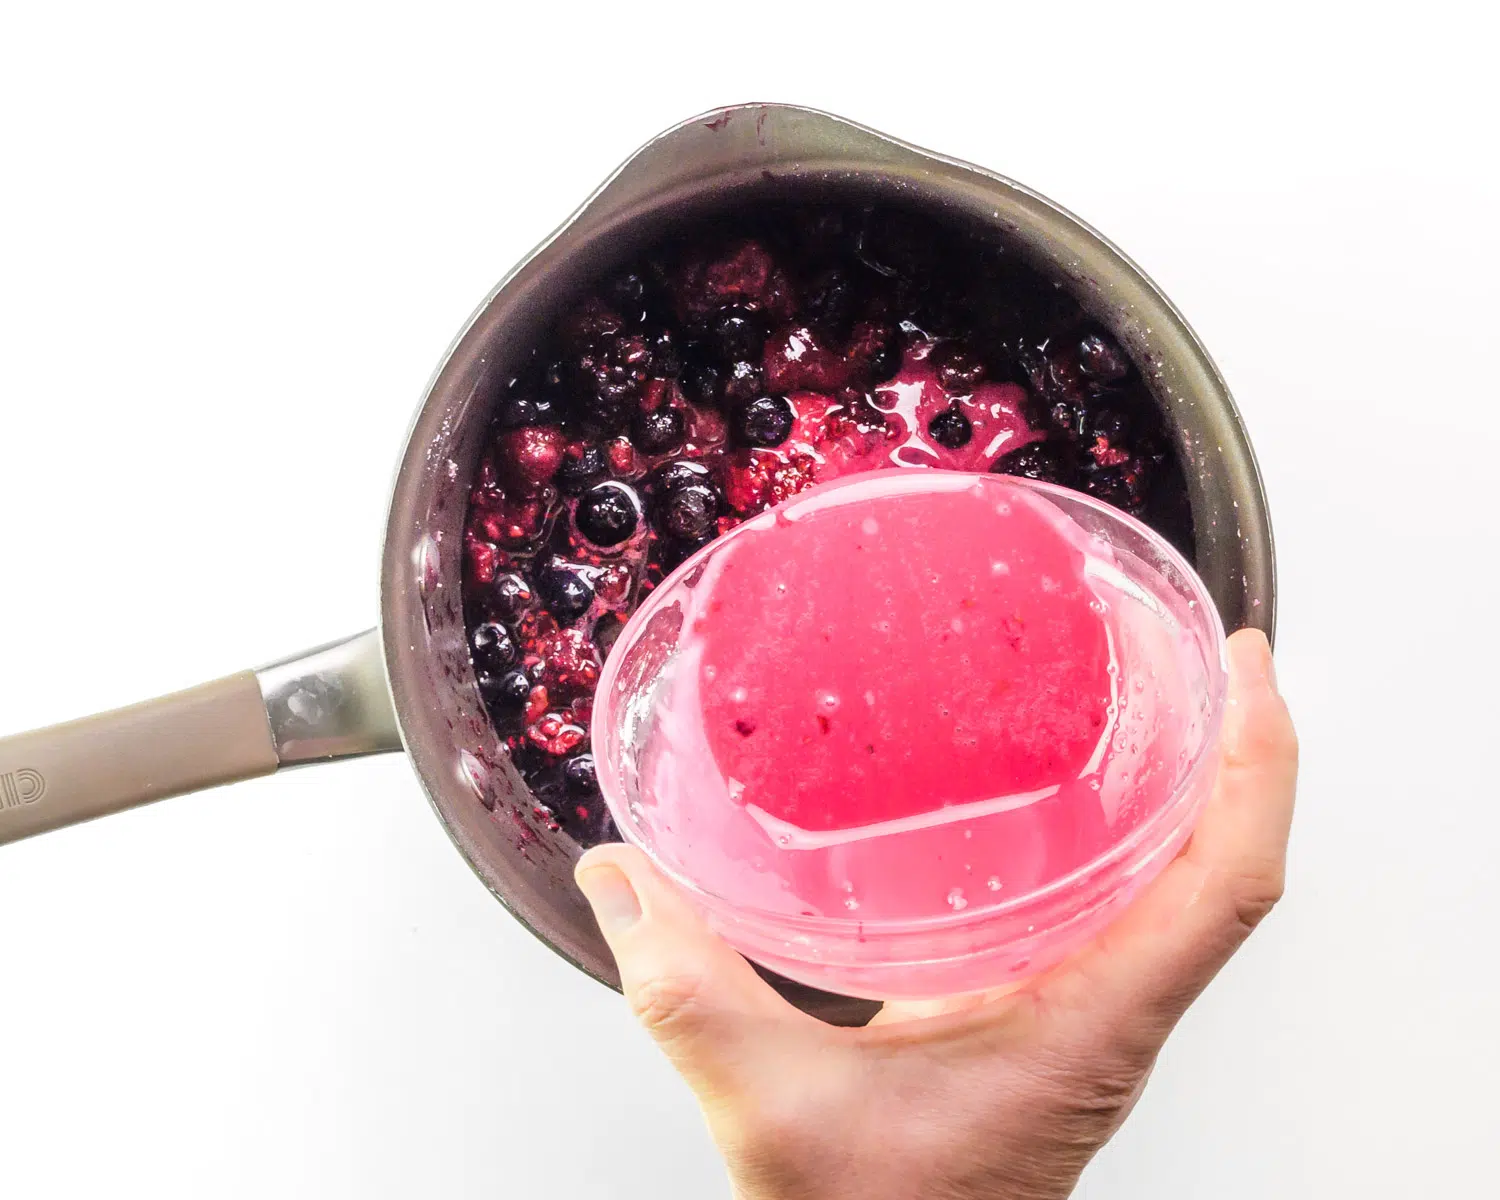 A berry slurry is being poured into a saucepan with more berries.